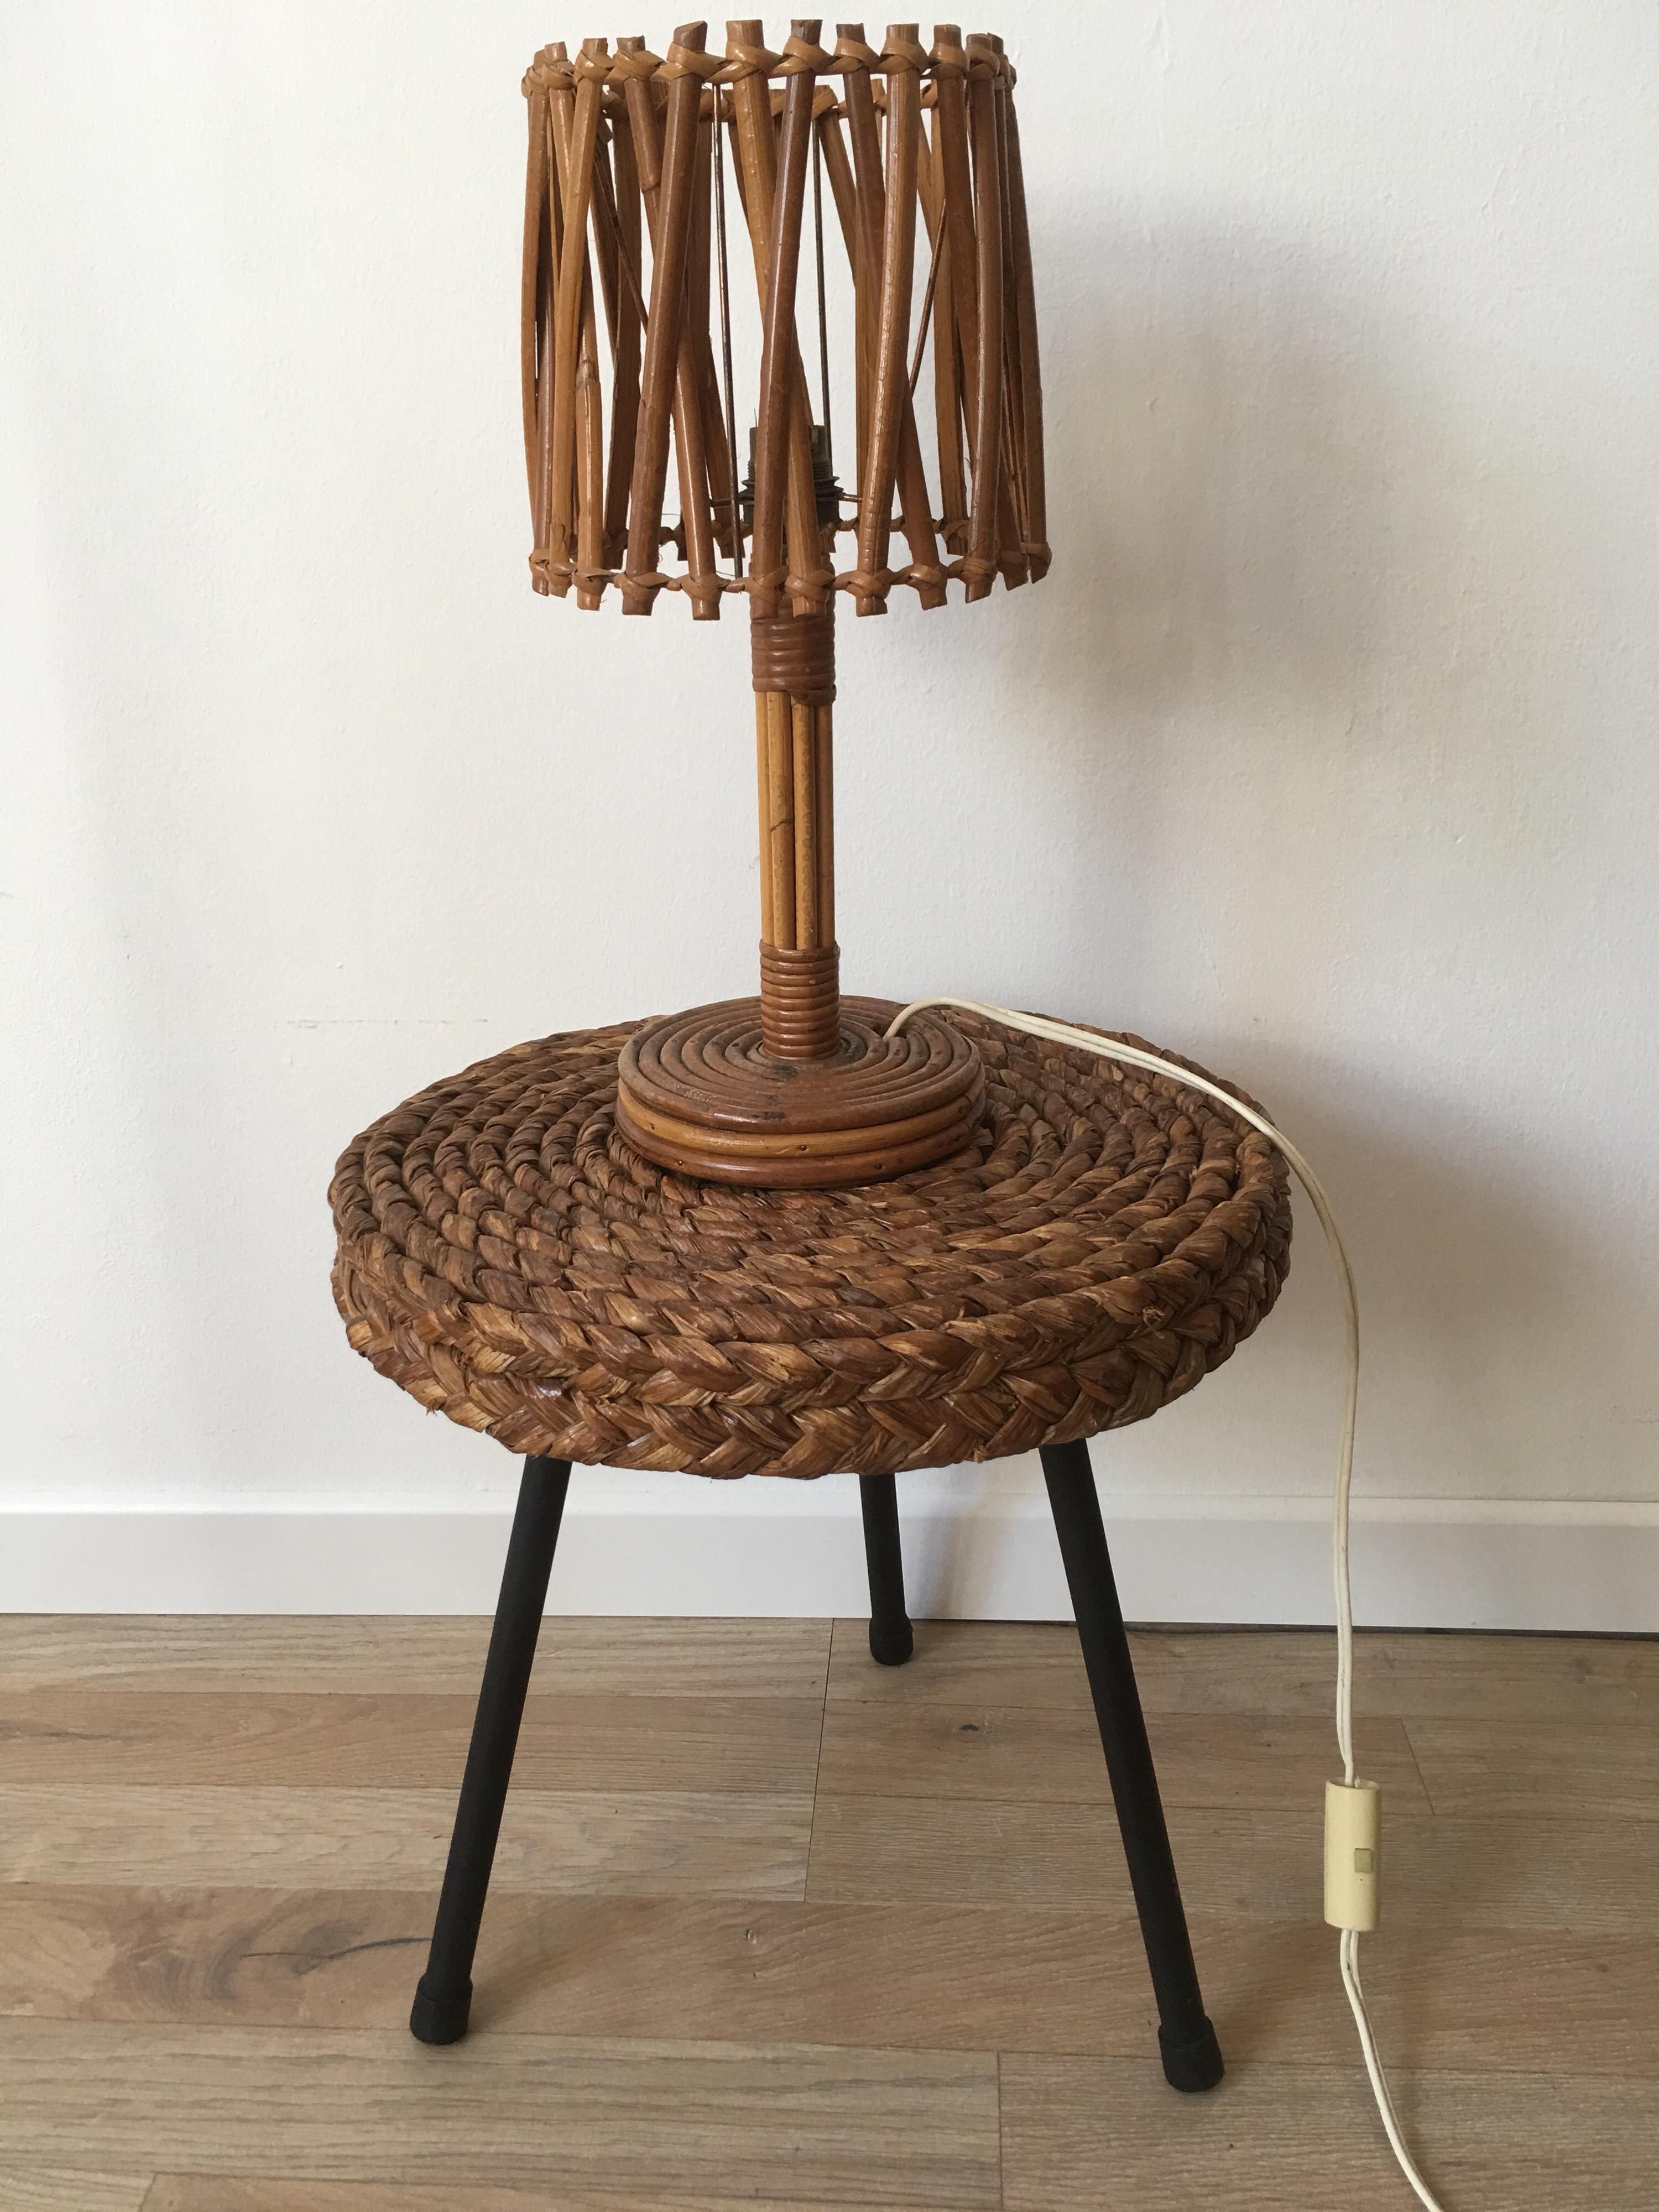 Louis Sognot Rattan Table Lamp, Original Rattan Lampshade, French, 1950s For Sale 1